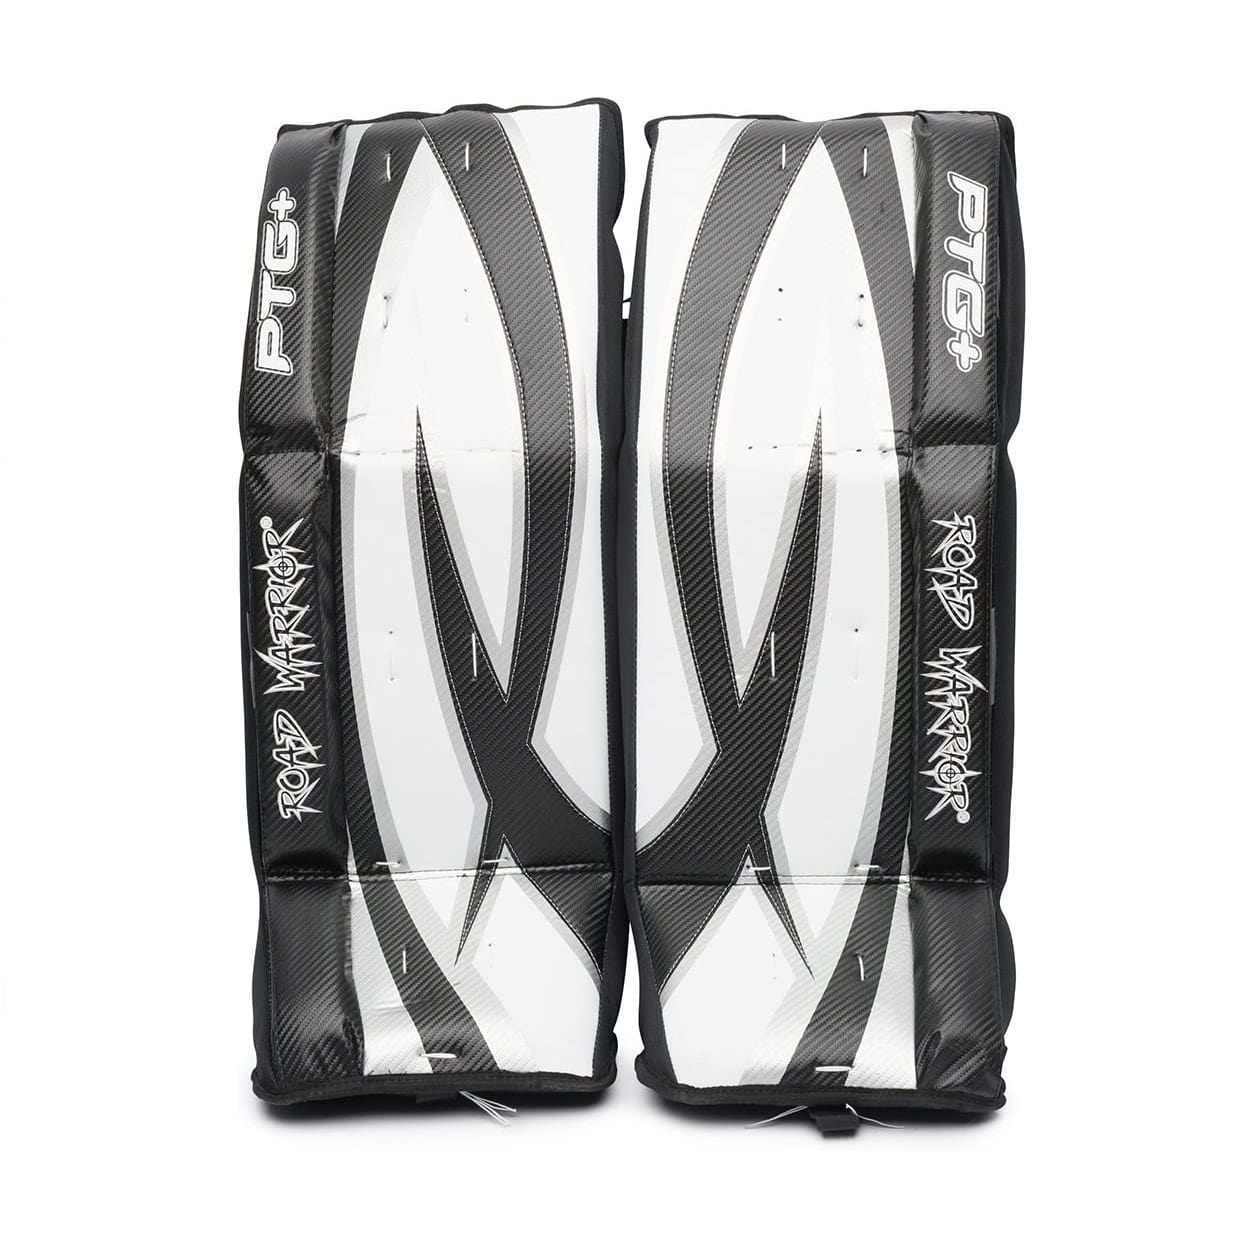 what-are-the-best-road-warrior-street-road-hockey-goalie-pads